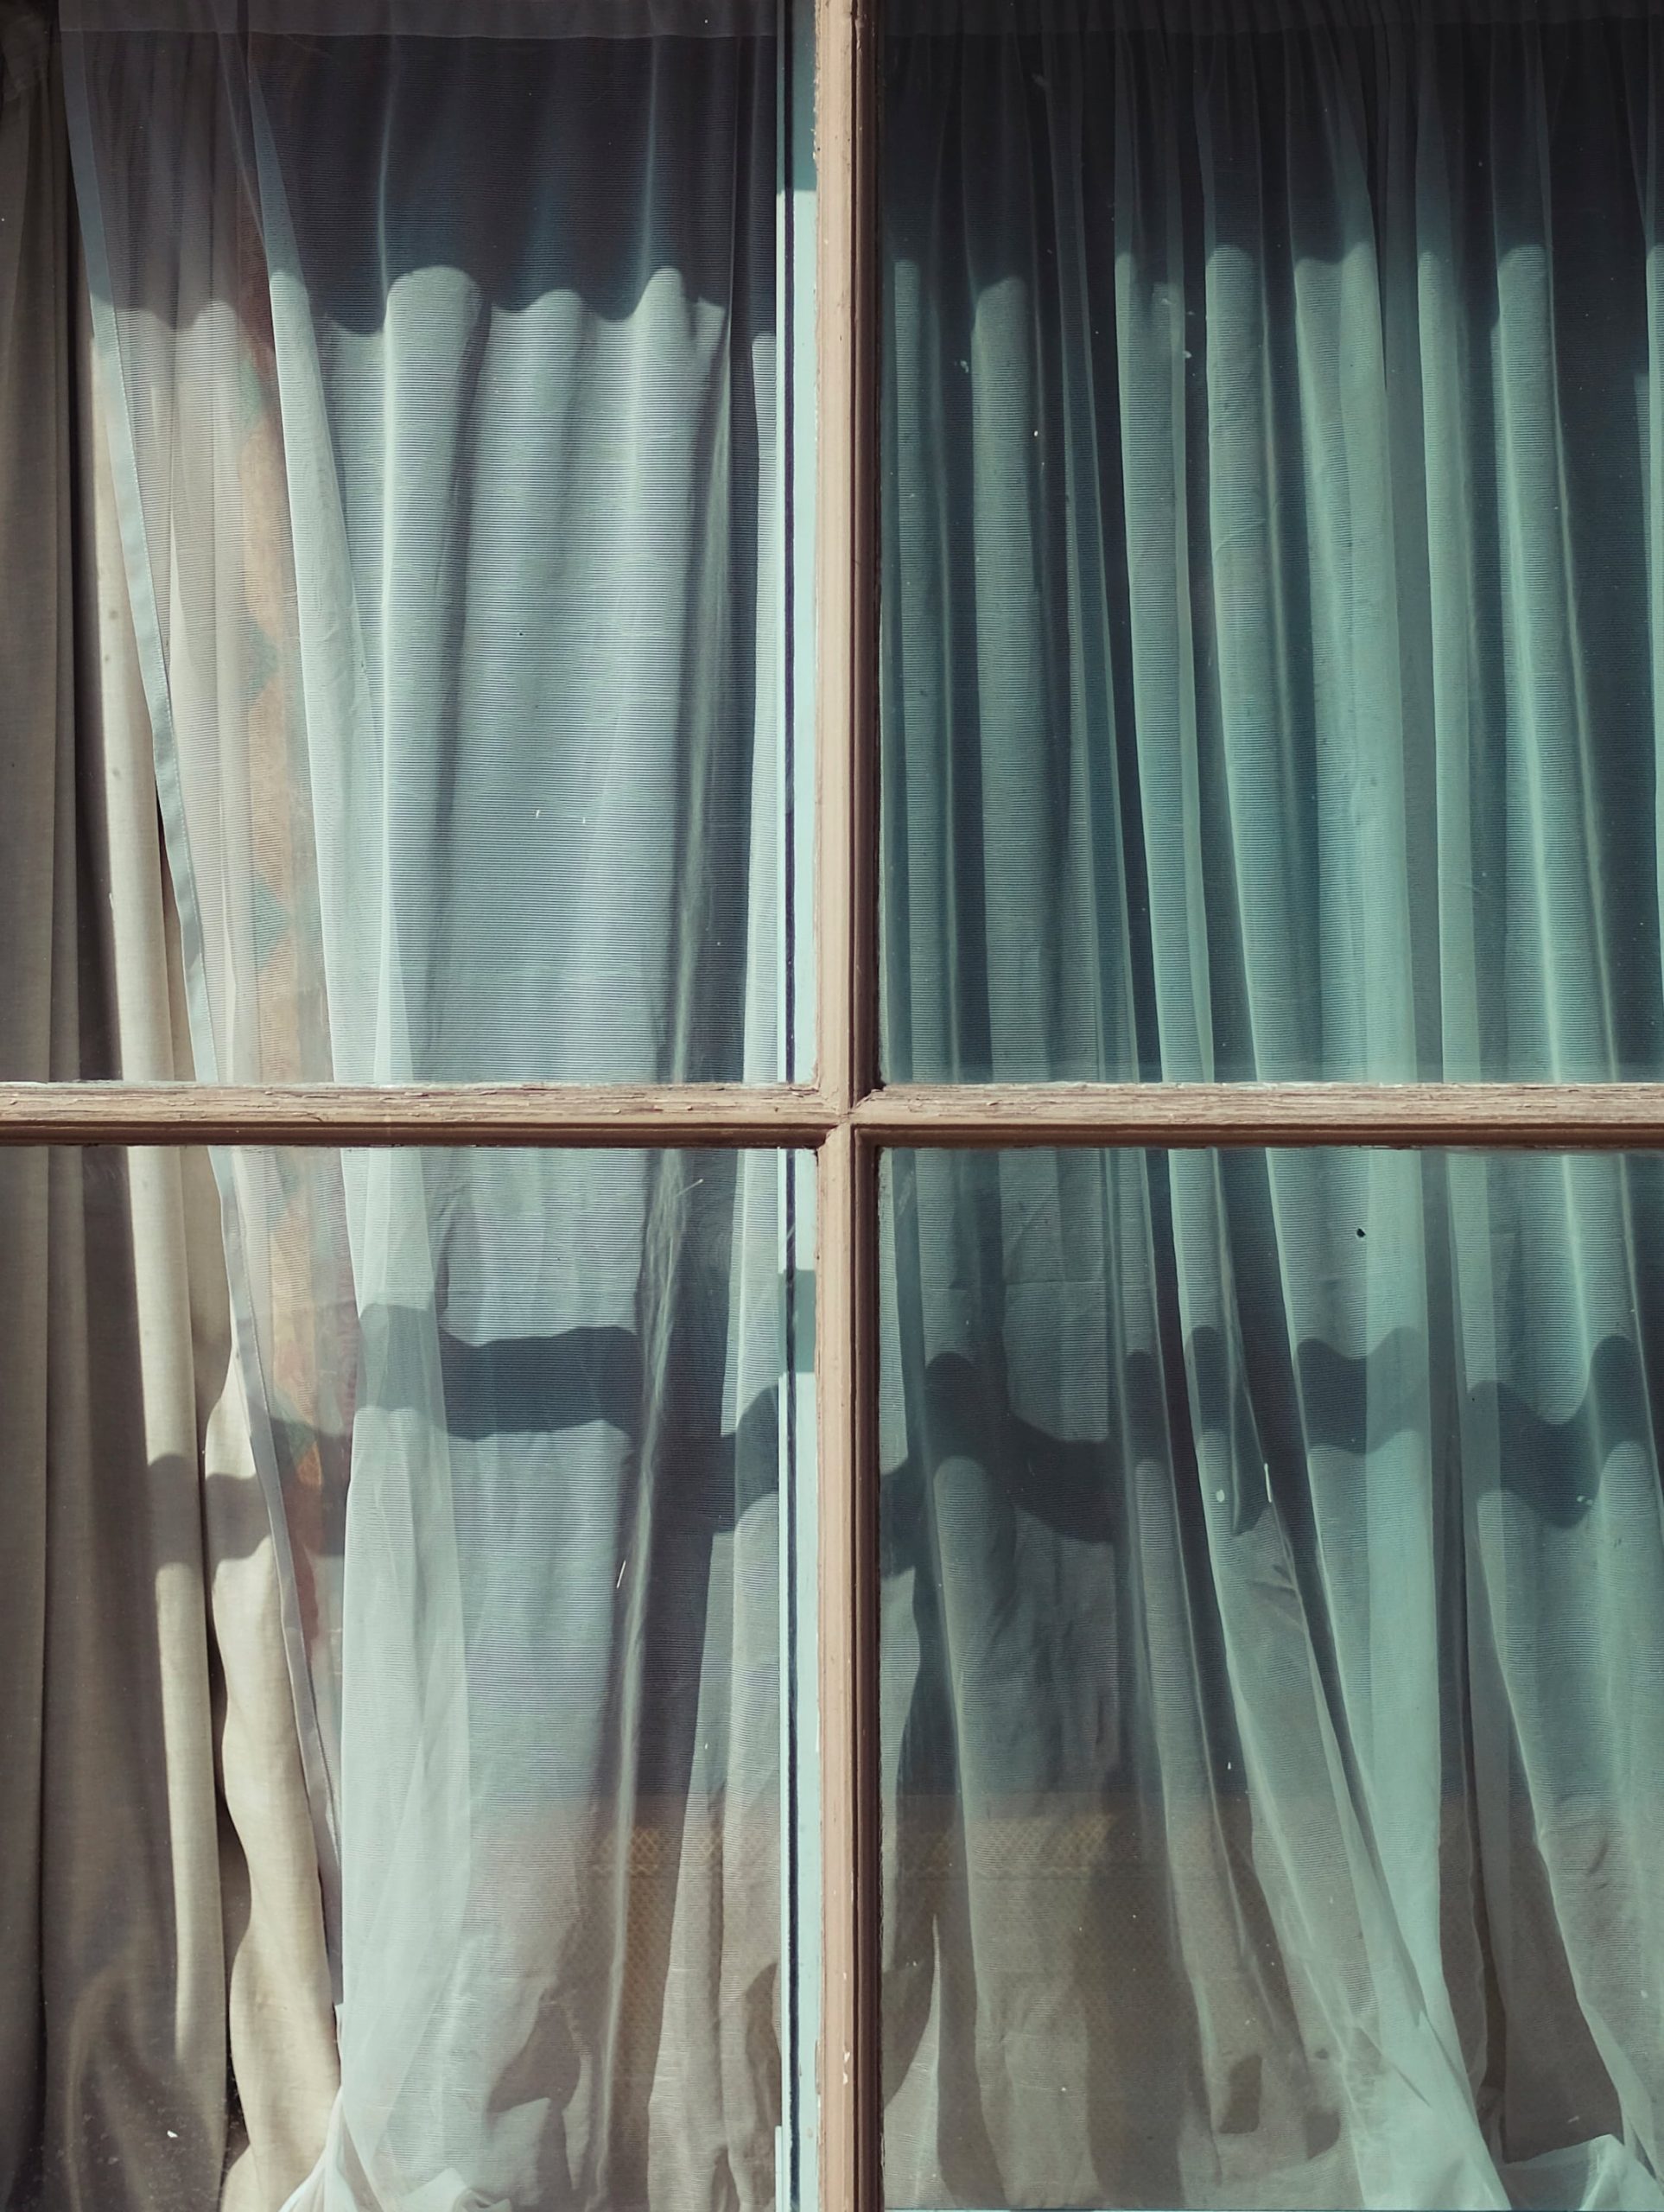 Curtains on a window.